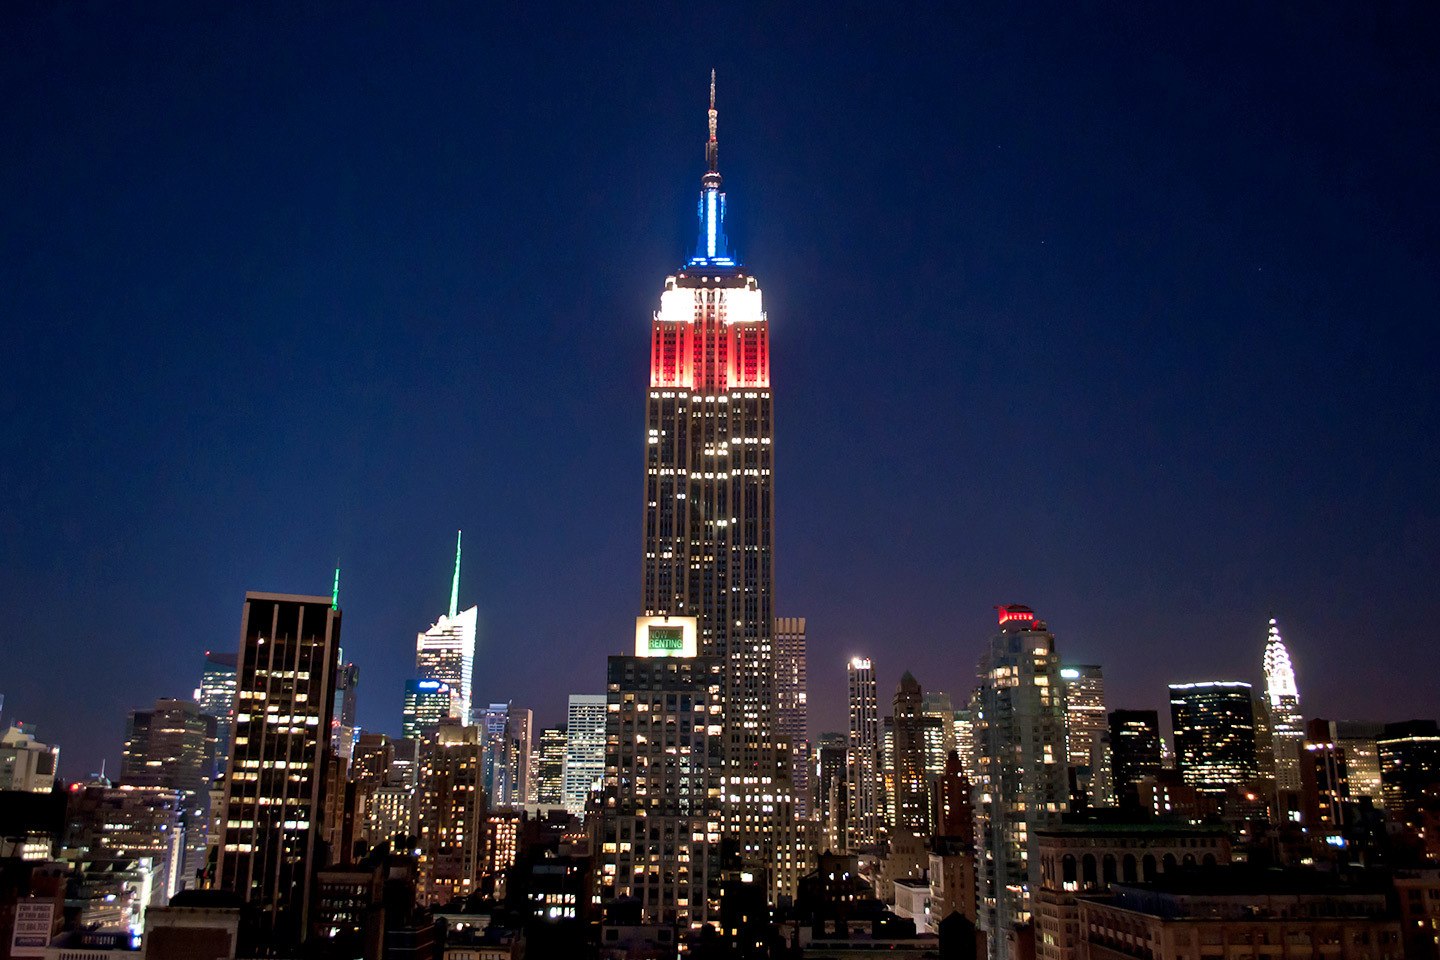 The Empire State Building at night in New York